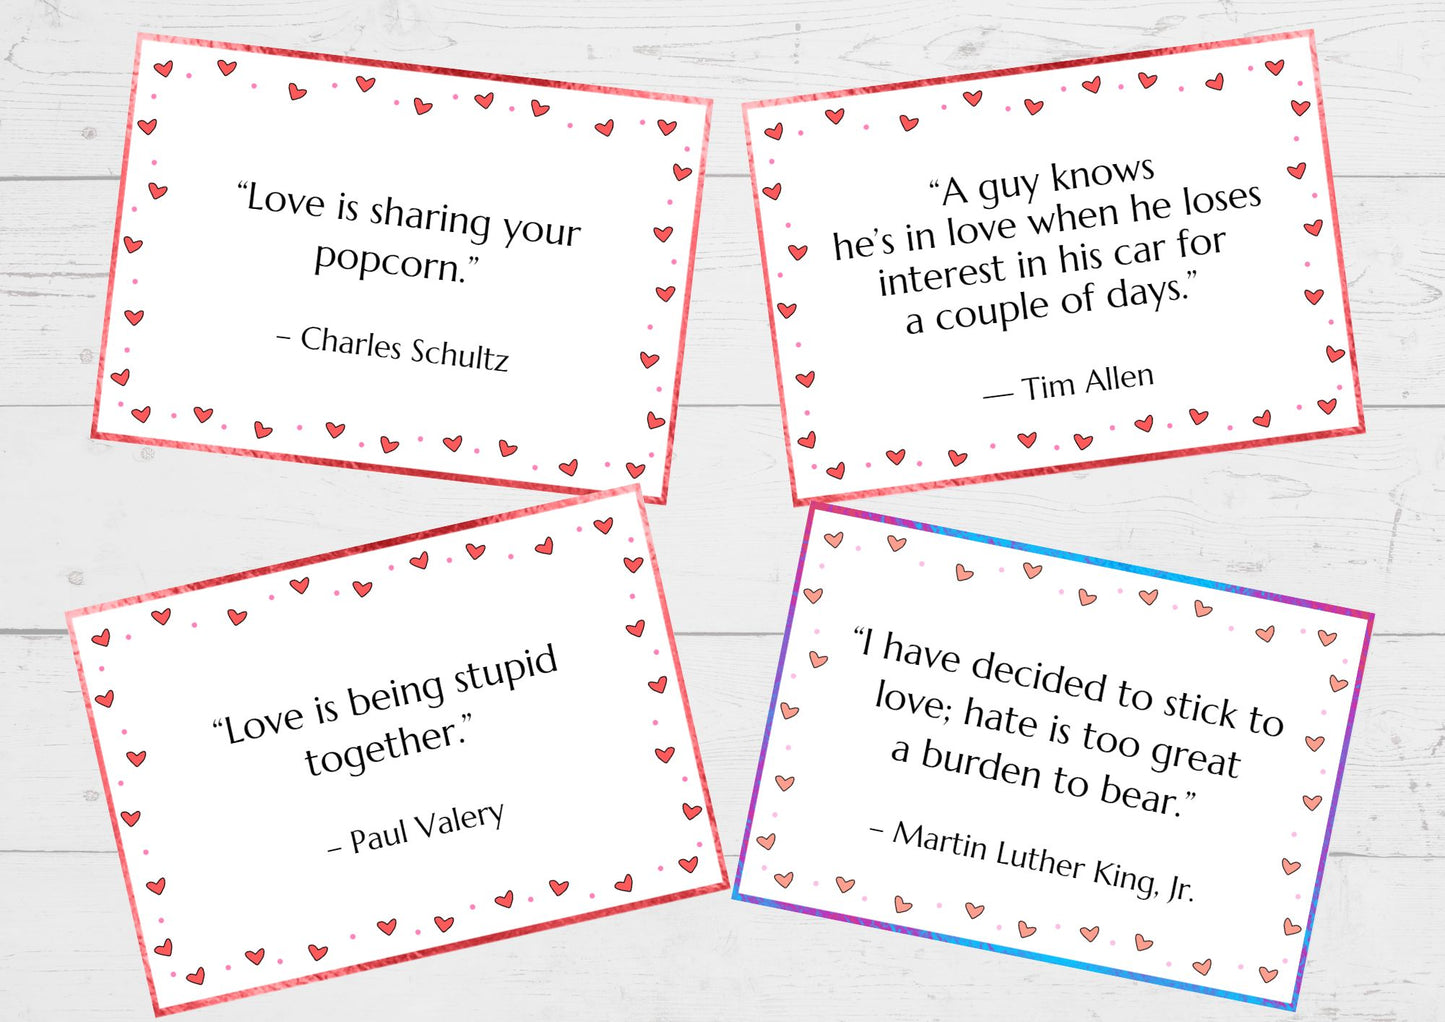 Greatcards - Valentine's Day - quotations and pictures